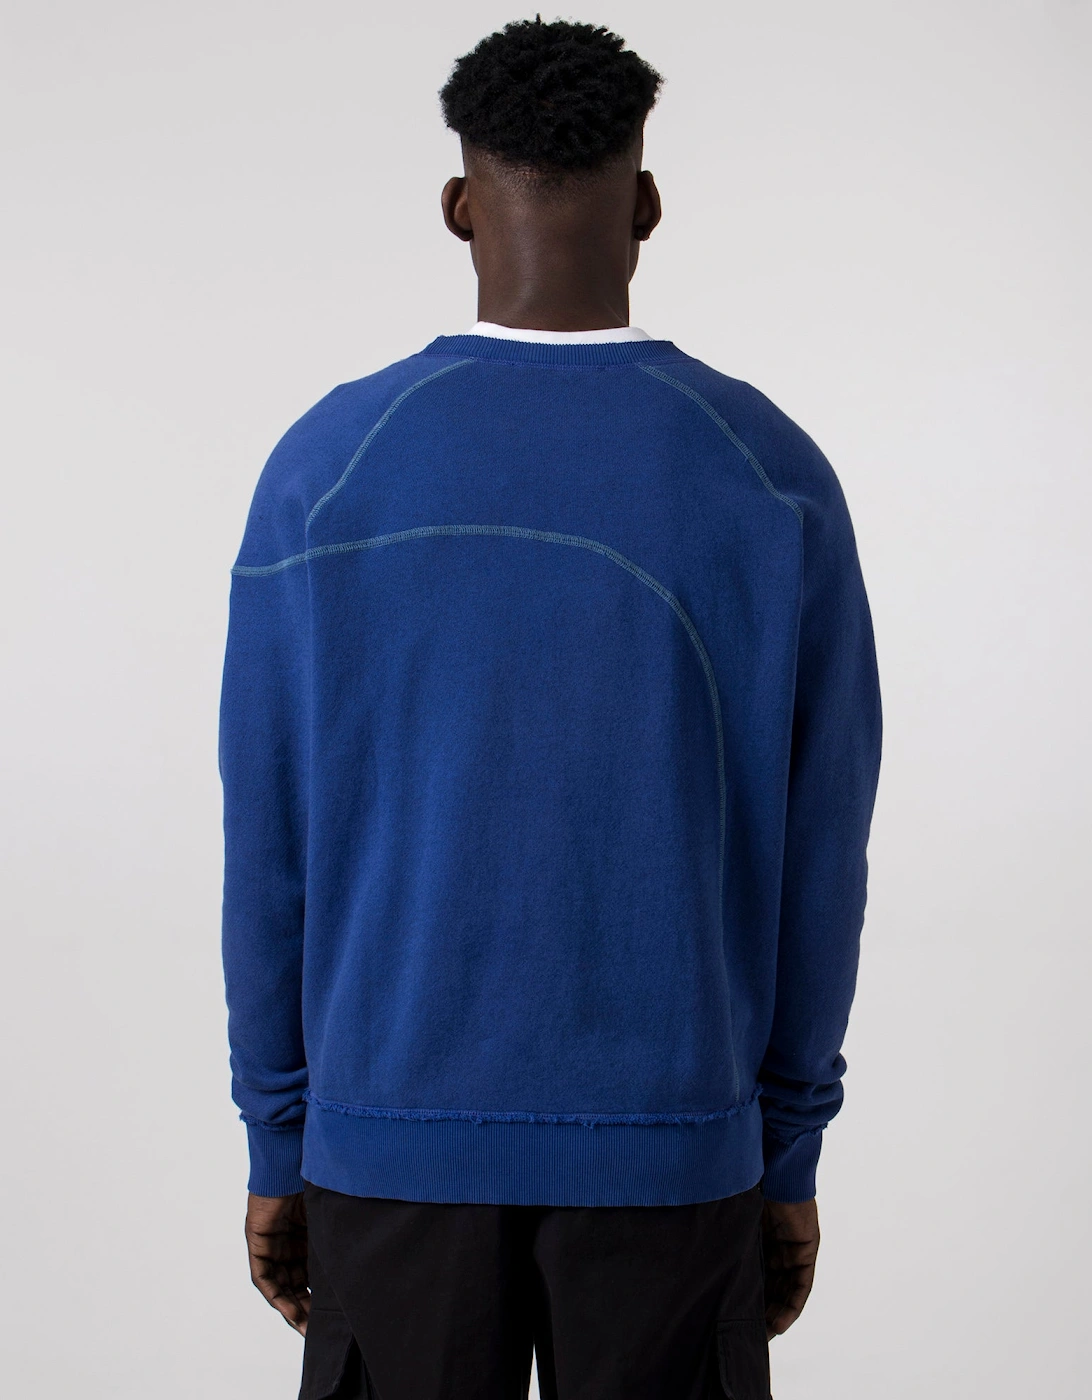 Relaxed Fit Intersect Sweatshirt